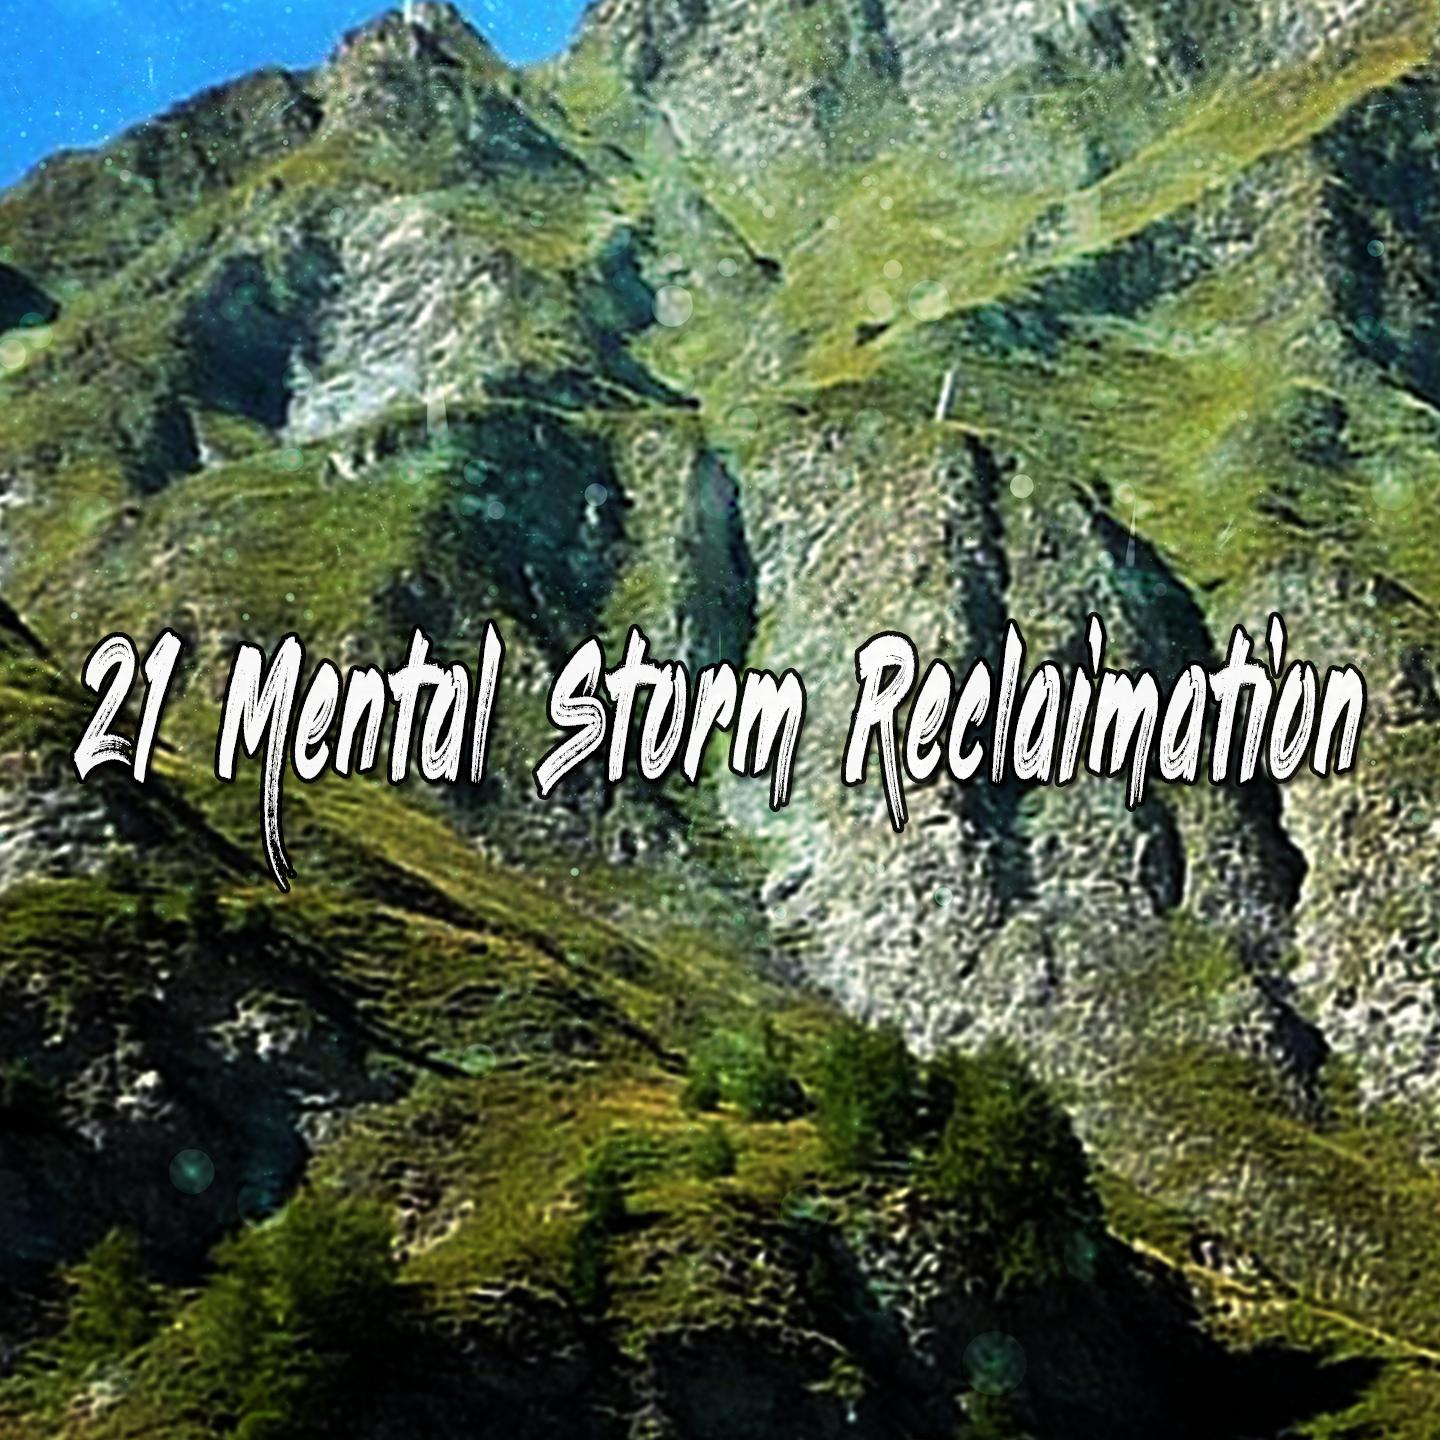 21 Mental Storm Reclaimation